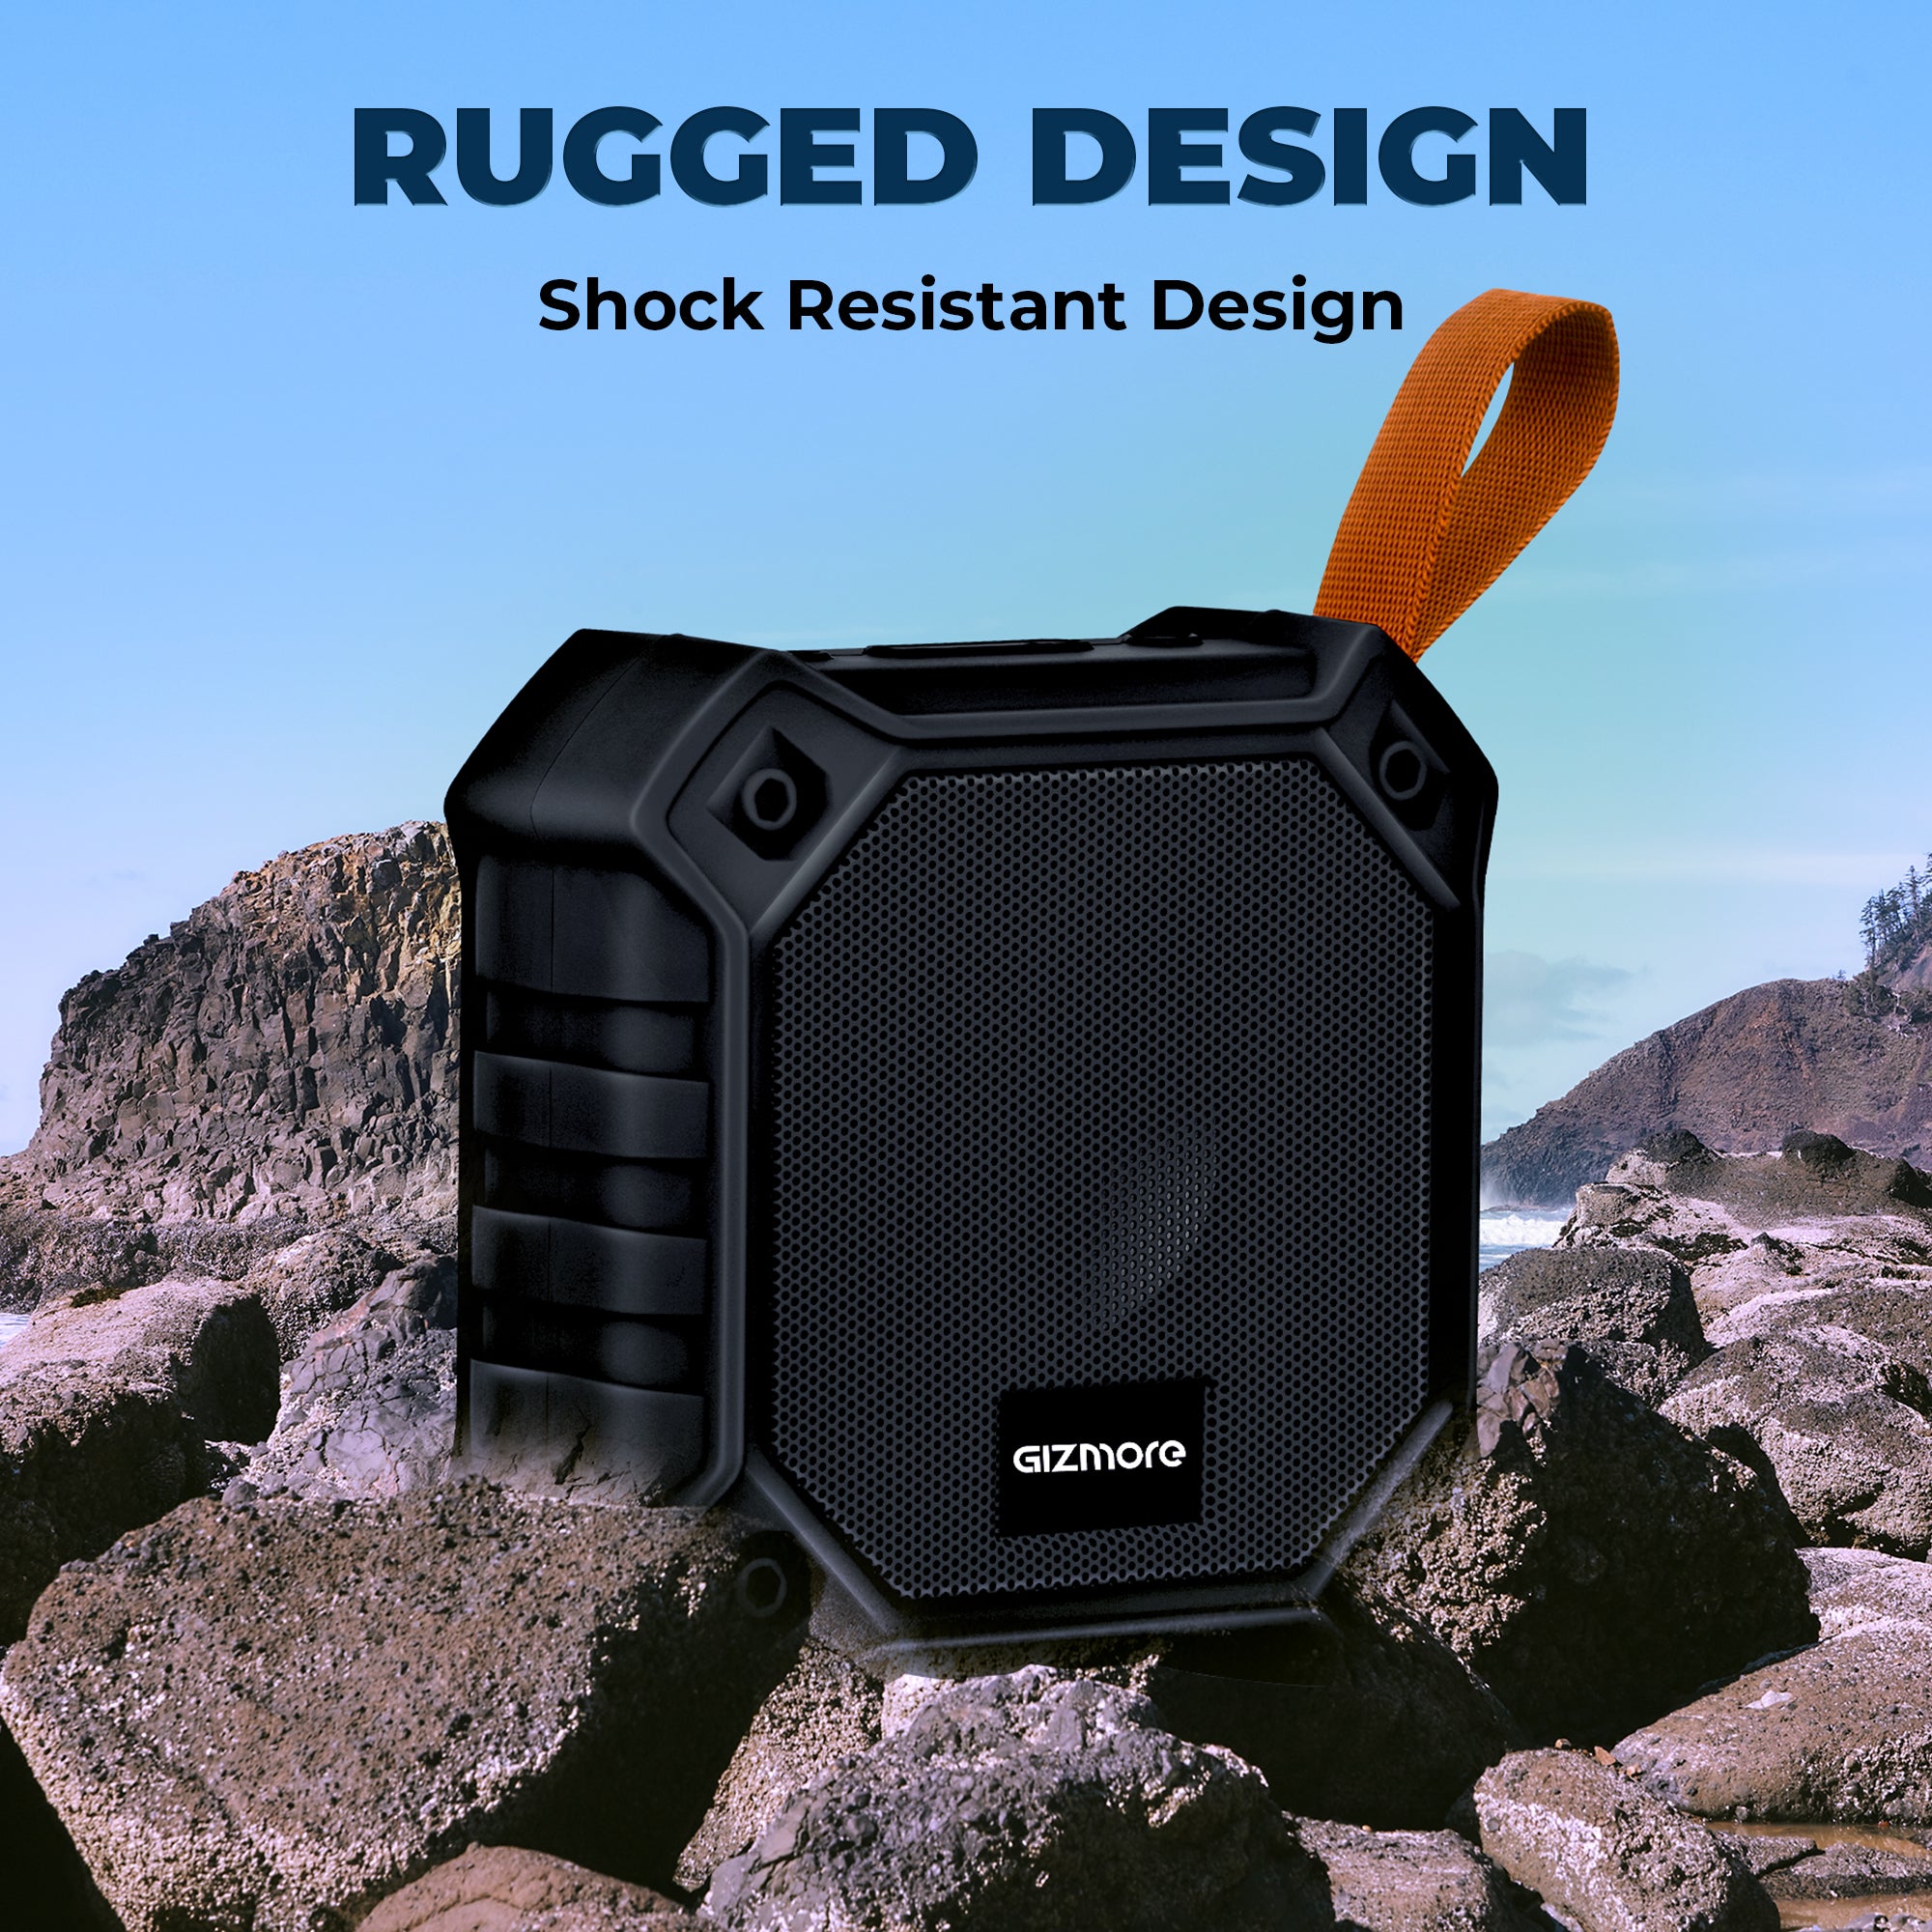 Gizmore Cube 5w Speaker Rugged Design, TWS Function and 12 hrs Playtime